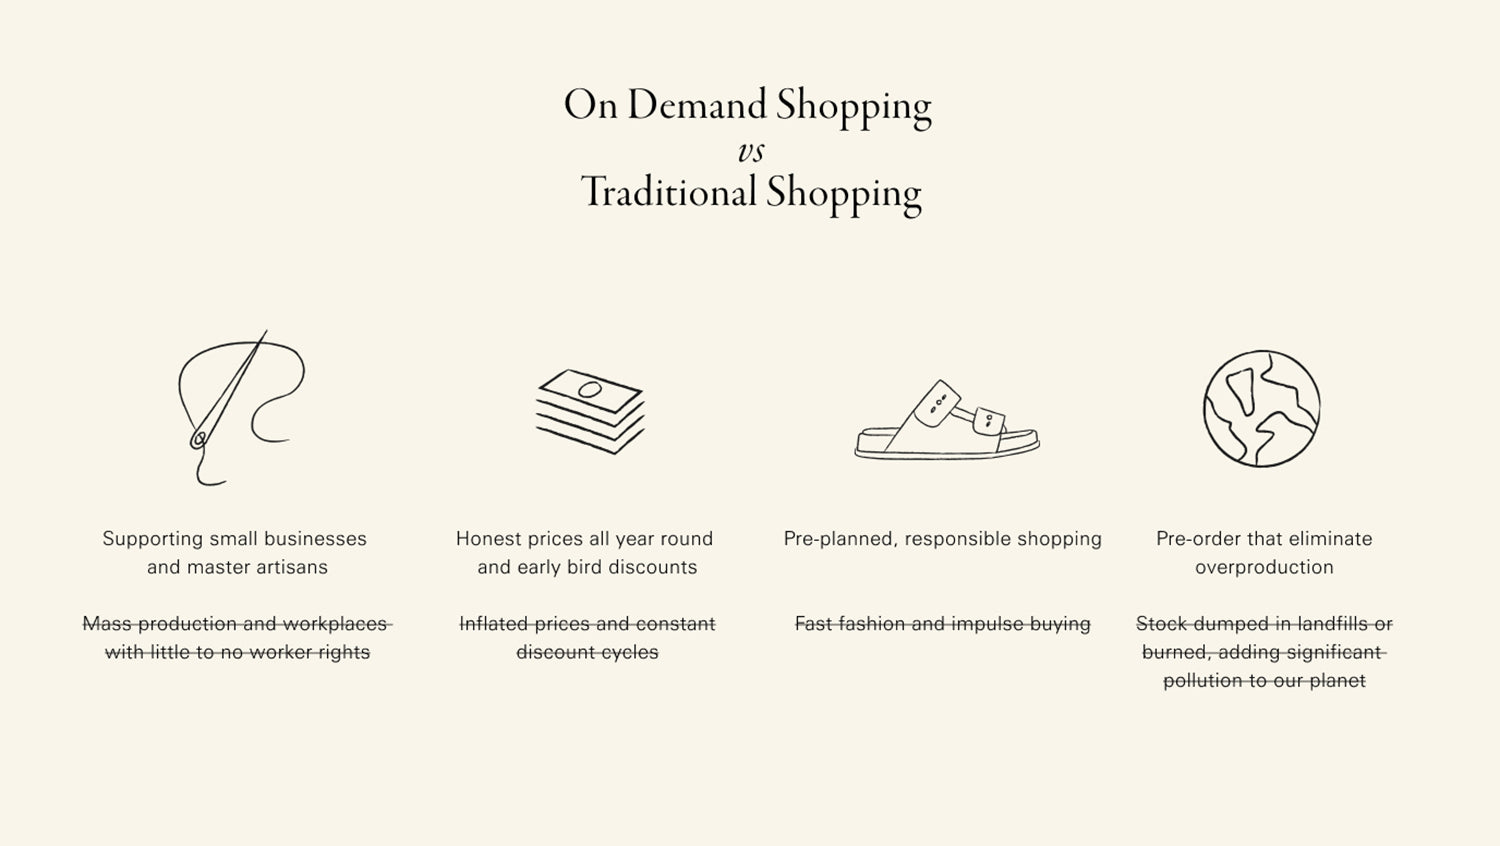 On-demand shopping versus traditional shopping